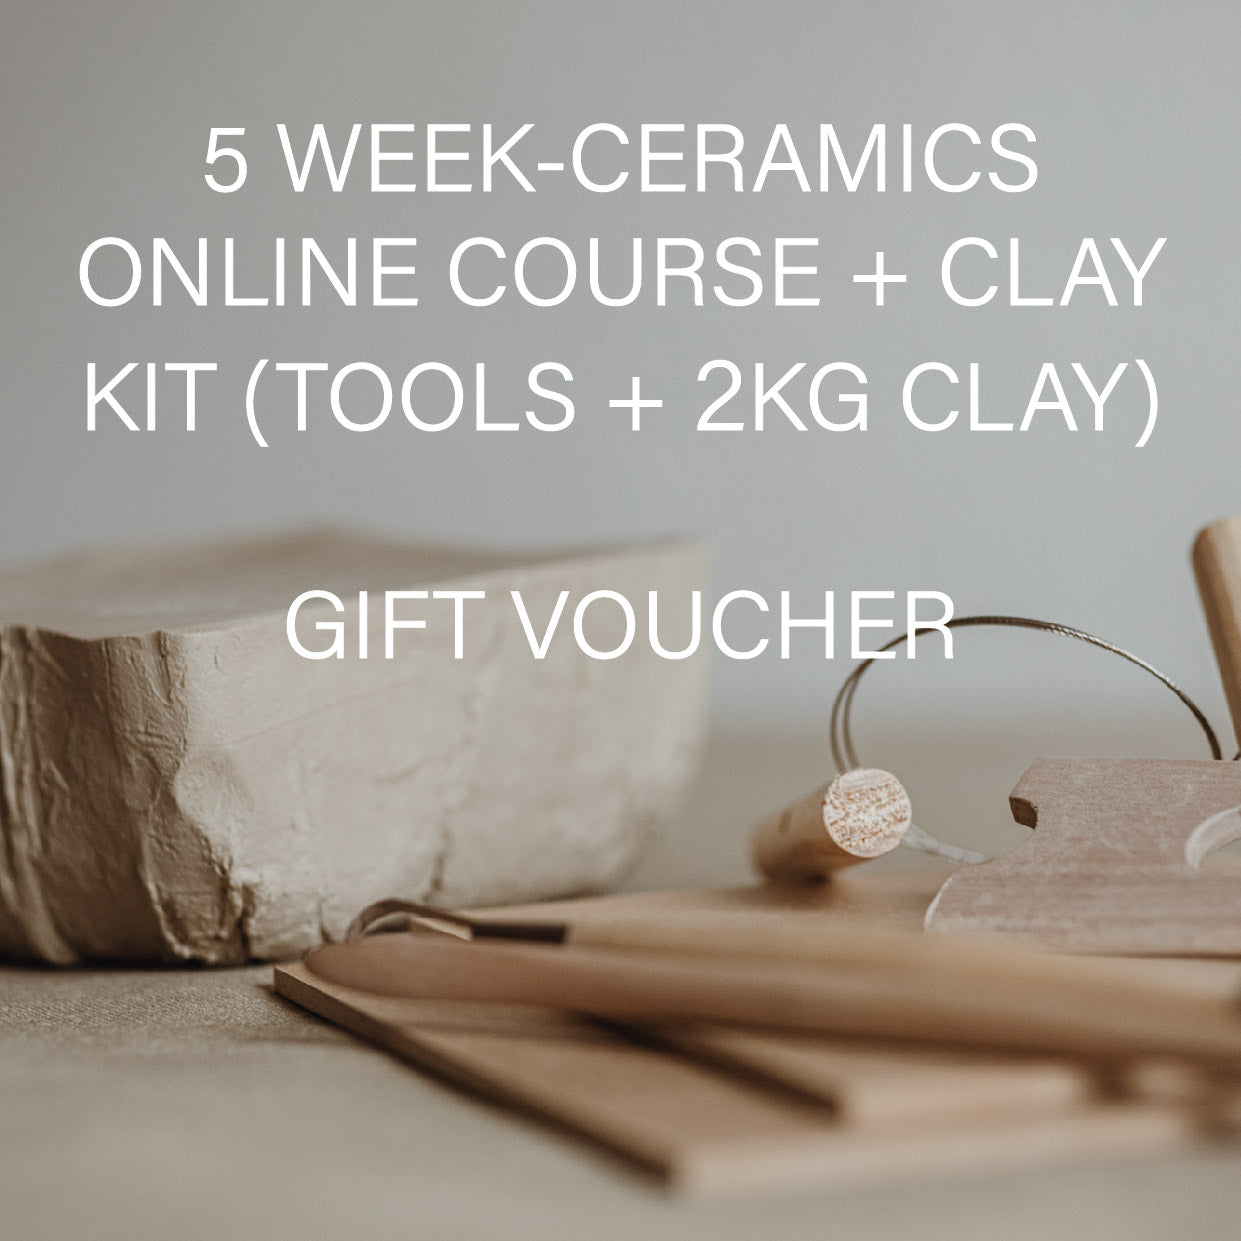 Gift Voucher - 5-Week Ceramics Online Course + Clay Kit (Tools + 2 kg Clay)